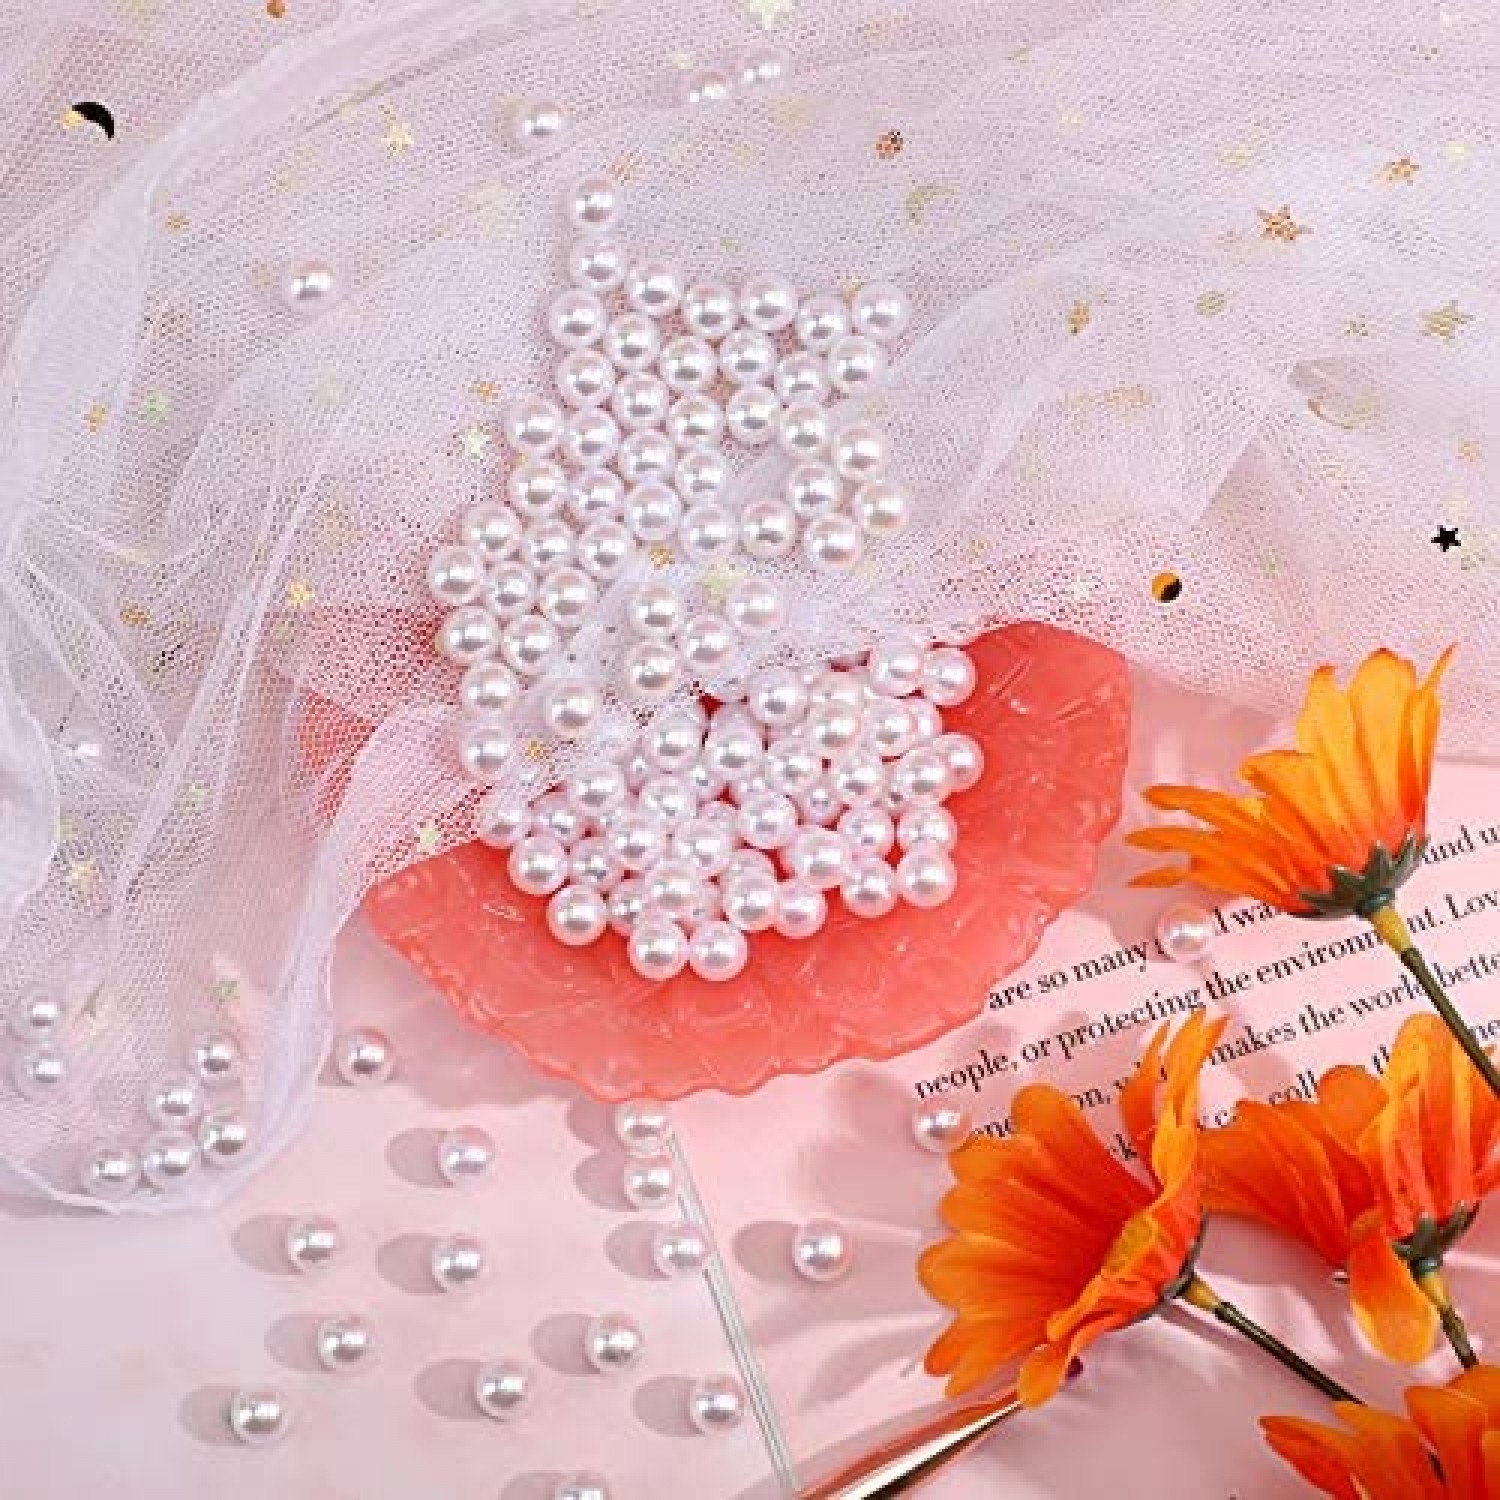 SUREAM White 1300Pcs Vase Fillers Pearls, 8mm/0.31in Faux Plastic Pearls  for Crafts No Hole